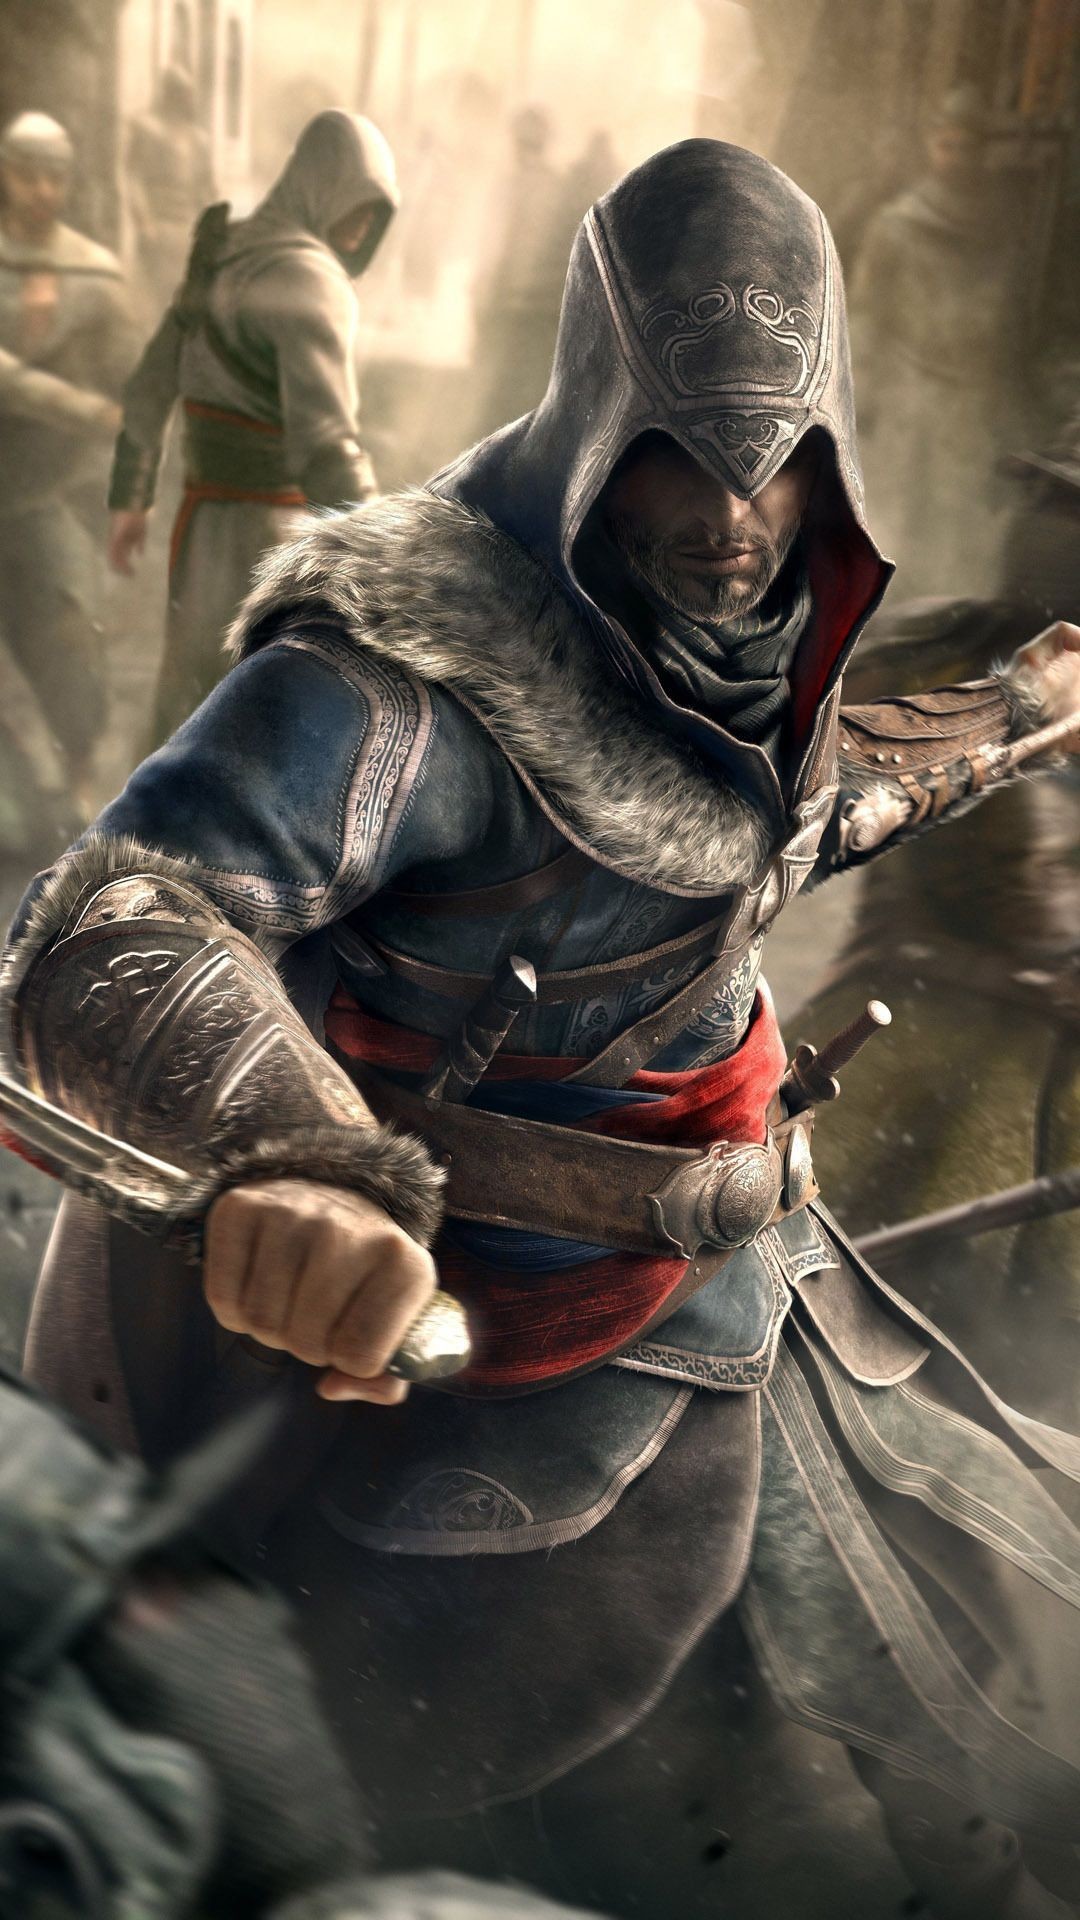 1080x1920  Assassins Creed Revelations Wallpapers for IPhone 6S+/7+/8+  [Retina HD]